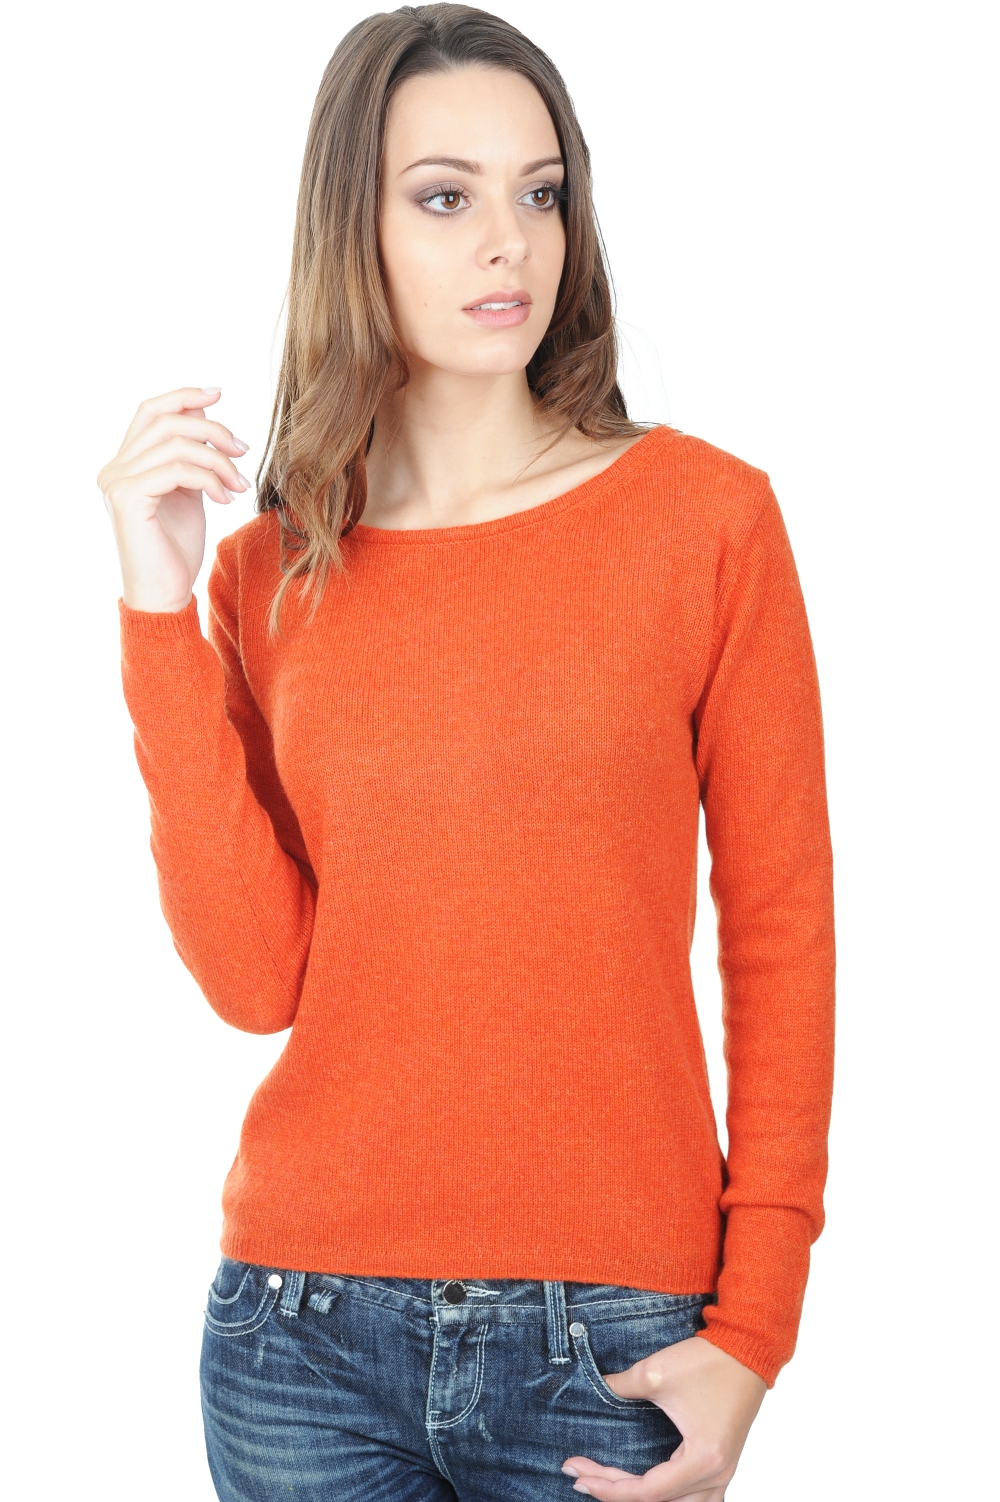 Cashmere ladies basic sweaters at low prices caleen paprika xl